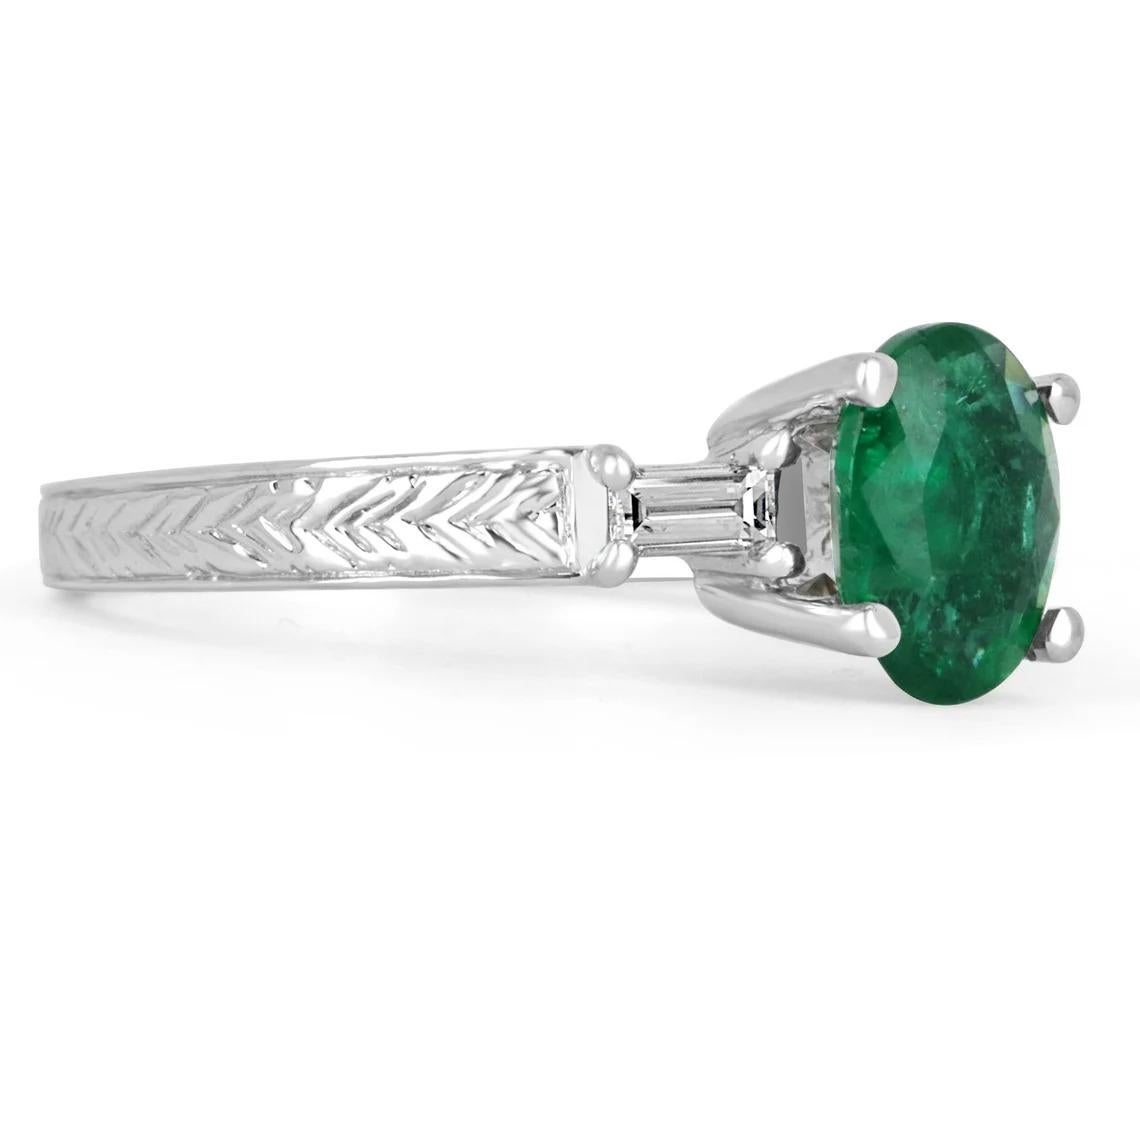 An extraordinary natural oval cut emerald and diamond ring. Crafted in gleaming 14K white gold, this ring features a vivacious, 1.06-carat natural oval cut emerald as the center stone. Set in a secure four-prong setting, this emerald has a vivid